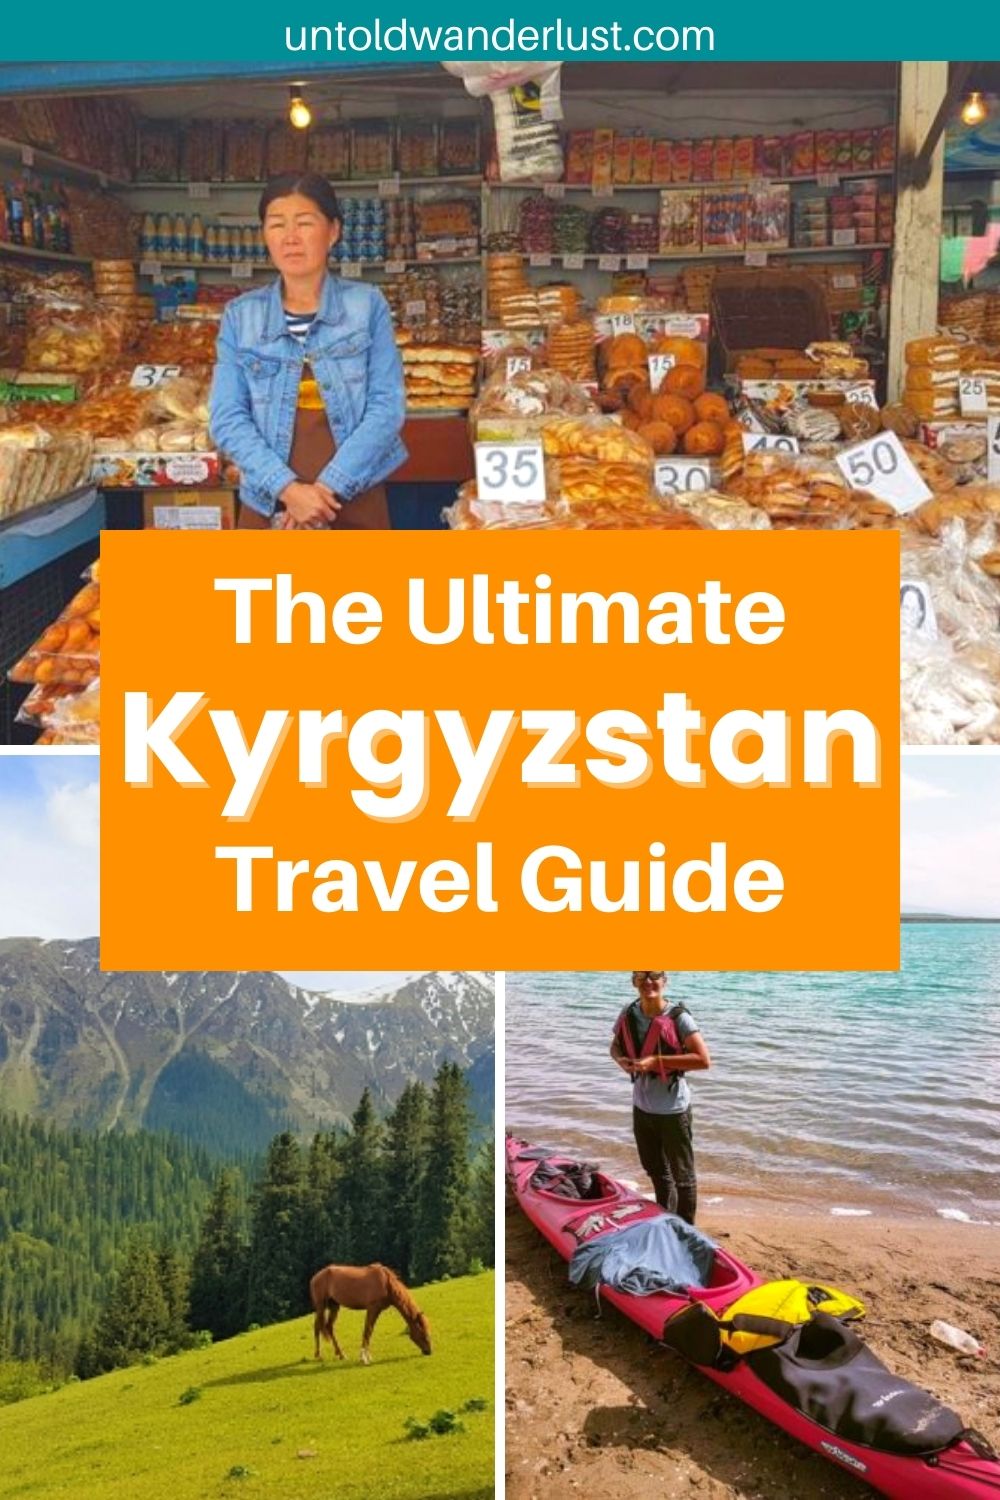 The Best Backpacking Kyrgyzstan Travel Guide & Itinerary